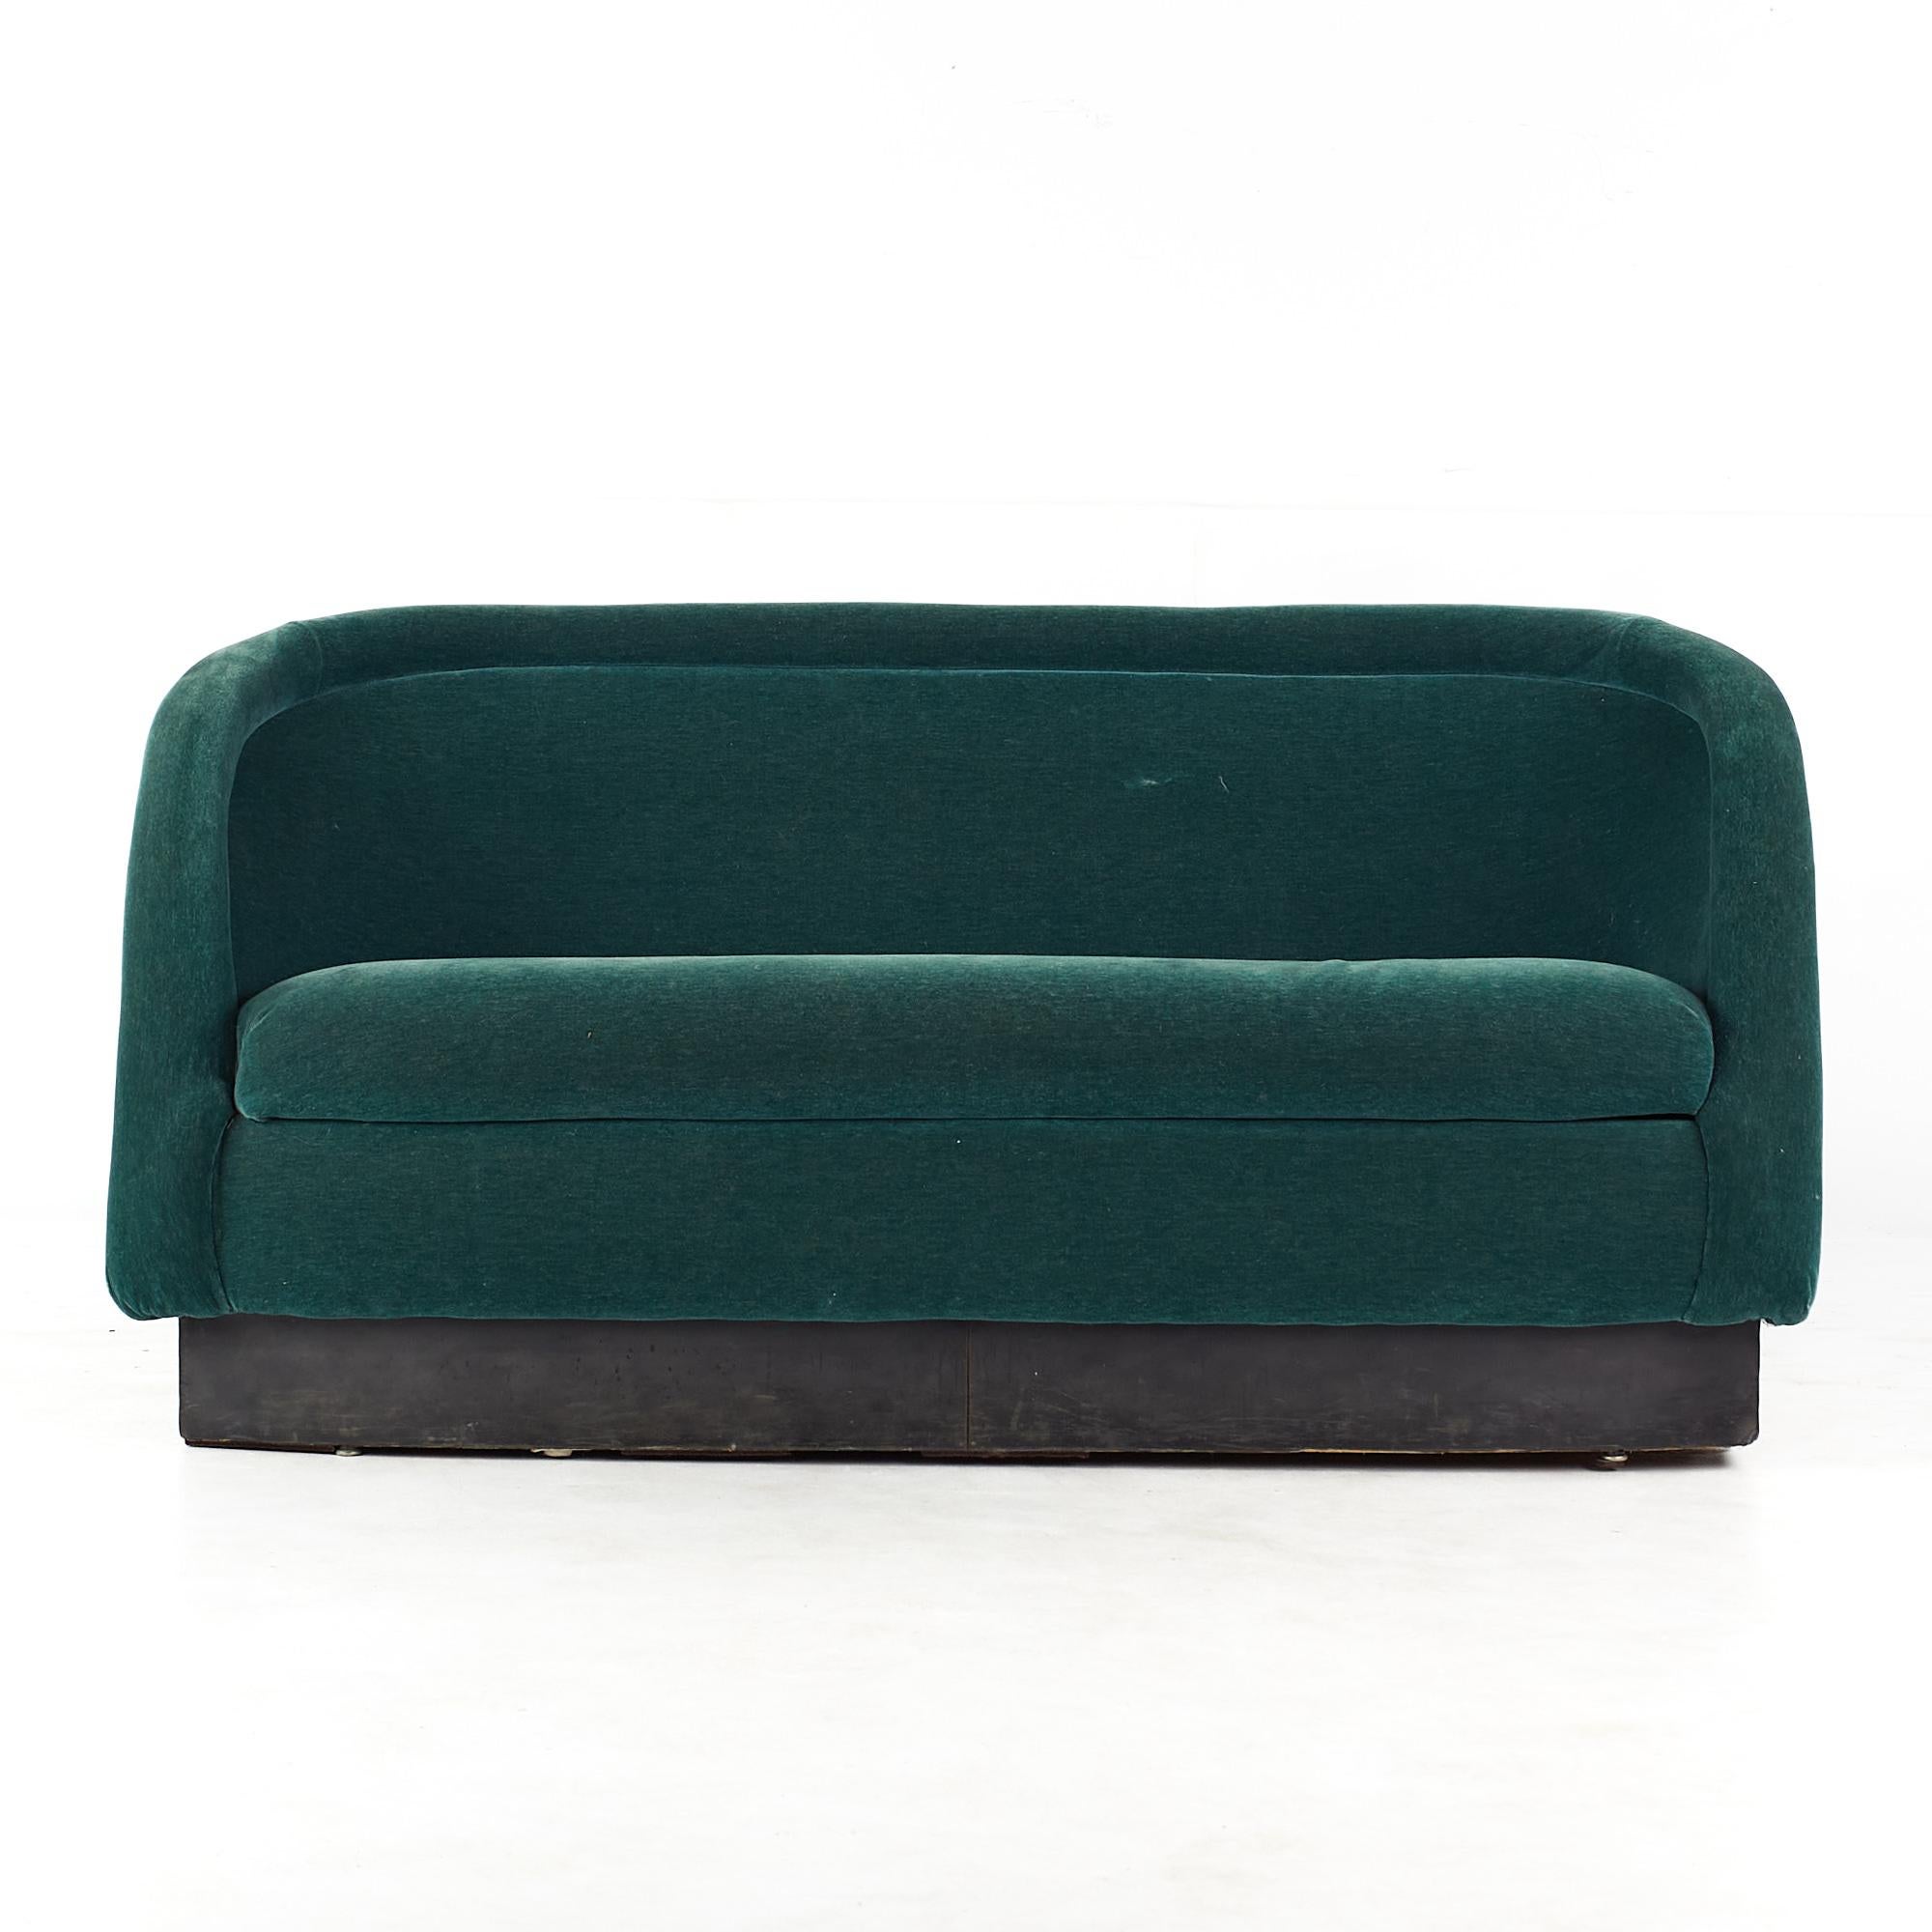 Ward Bennett Style Mid Century Green Velvet Sofa Settee

This sofa measures: 61 wide x 29 deep x 30.5 inches high, with a seat height of 18 inches

All pieces of furniture can be had in what we call restored vintage condition. That means the piece